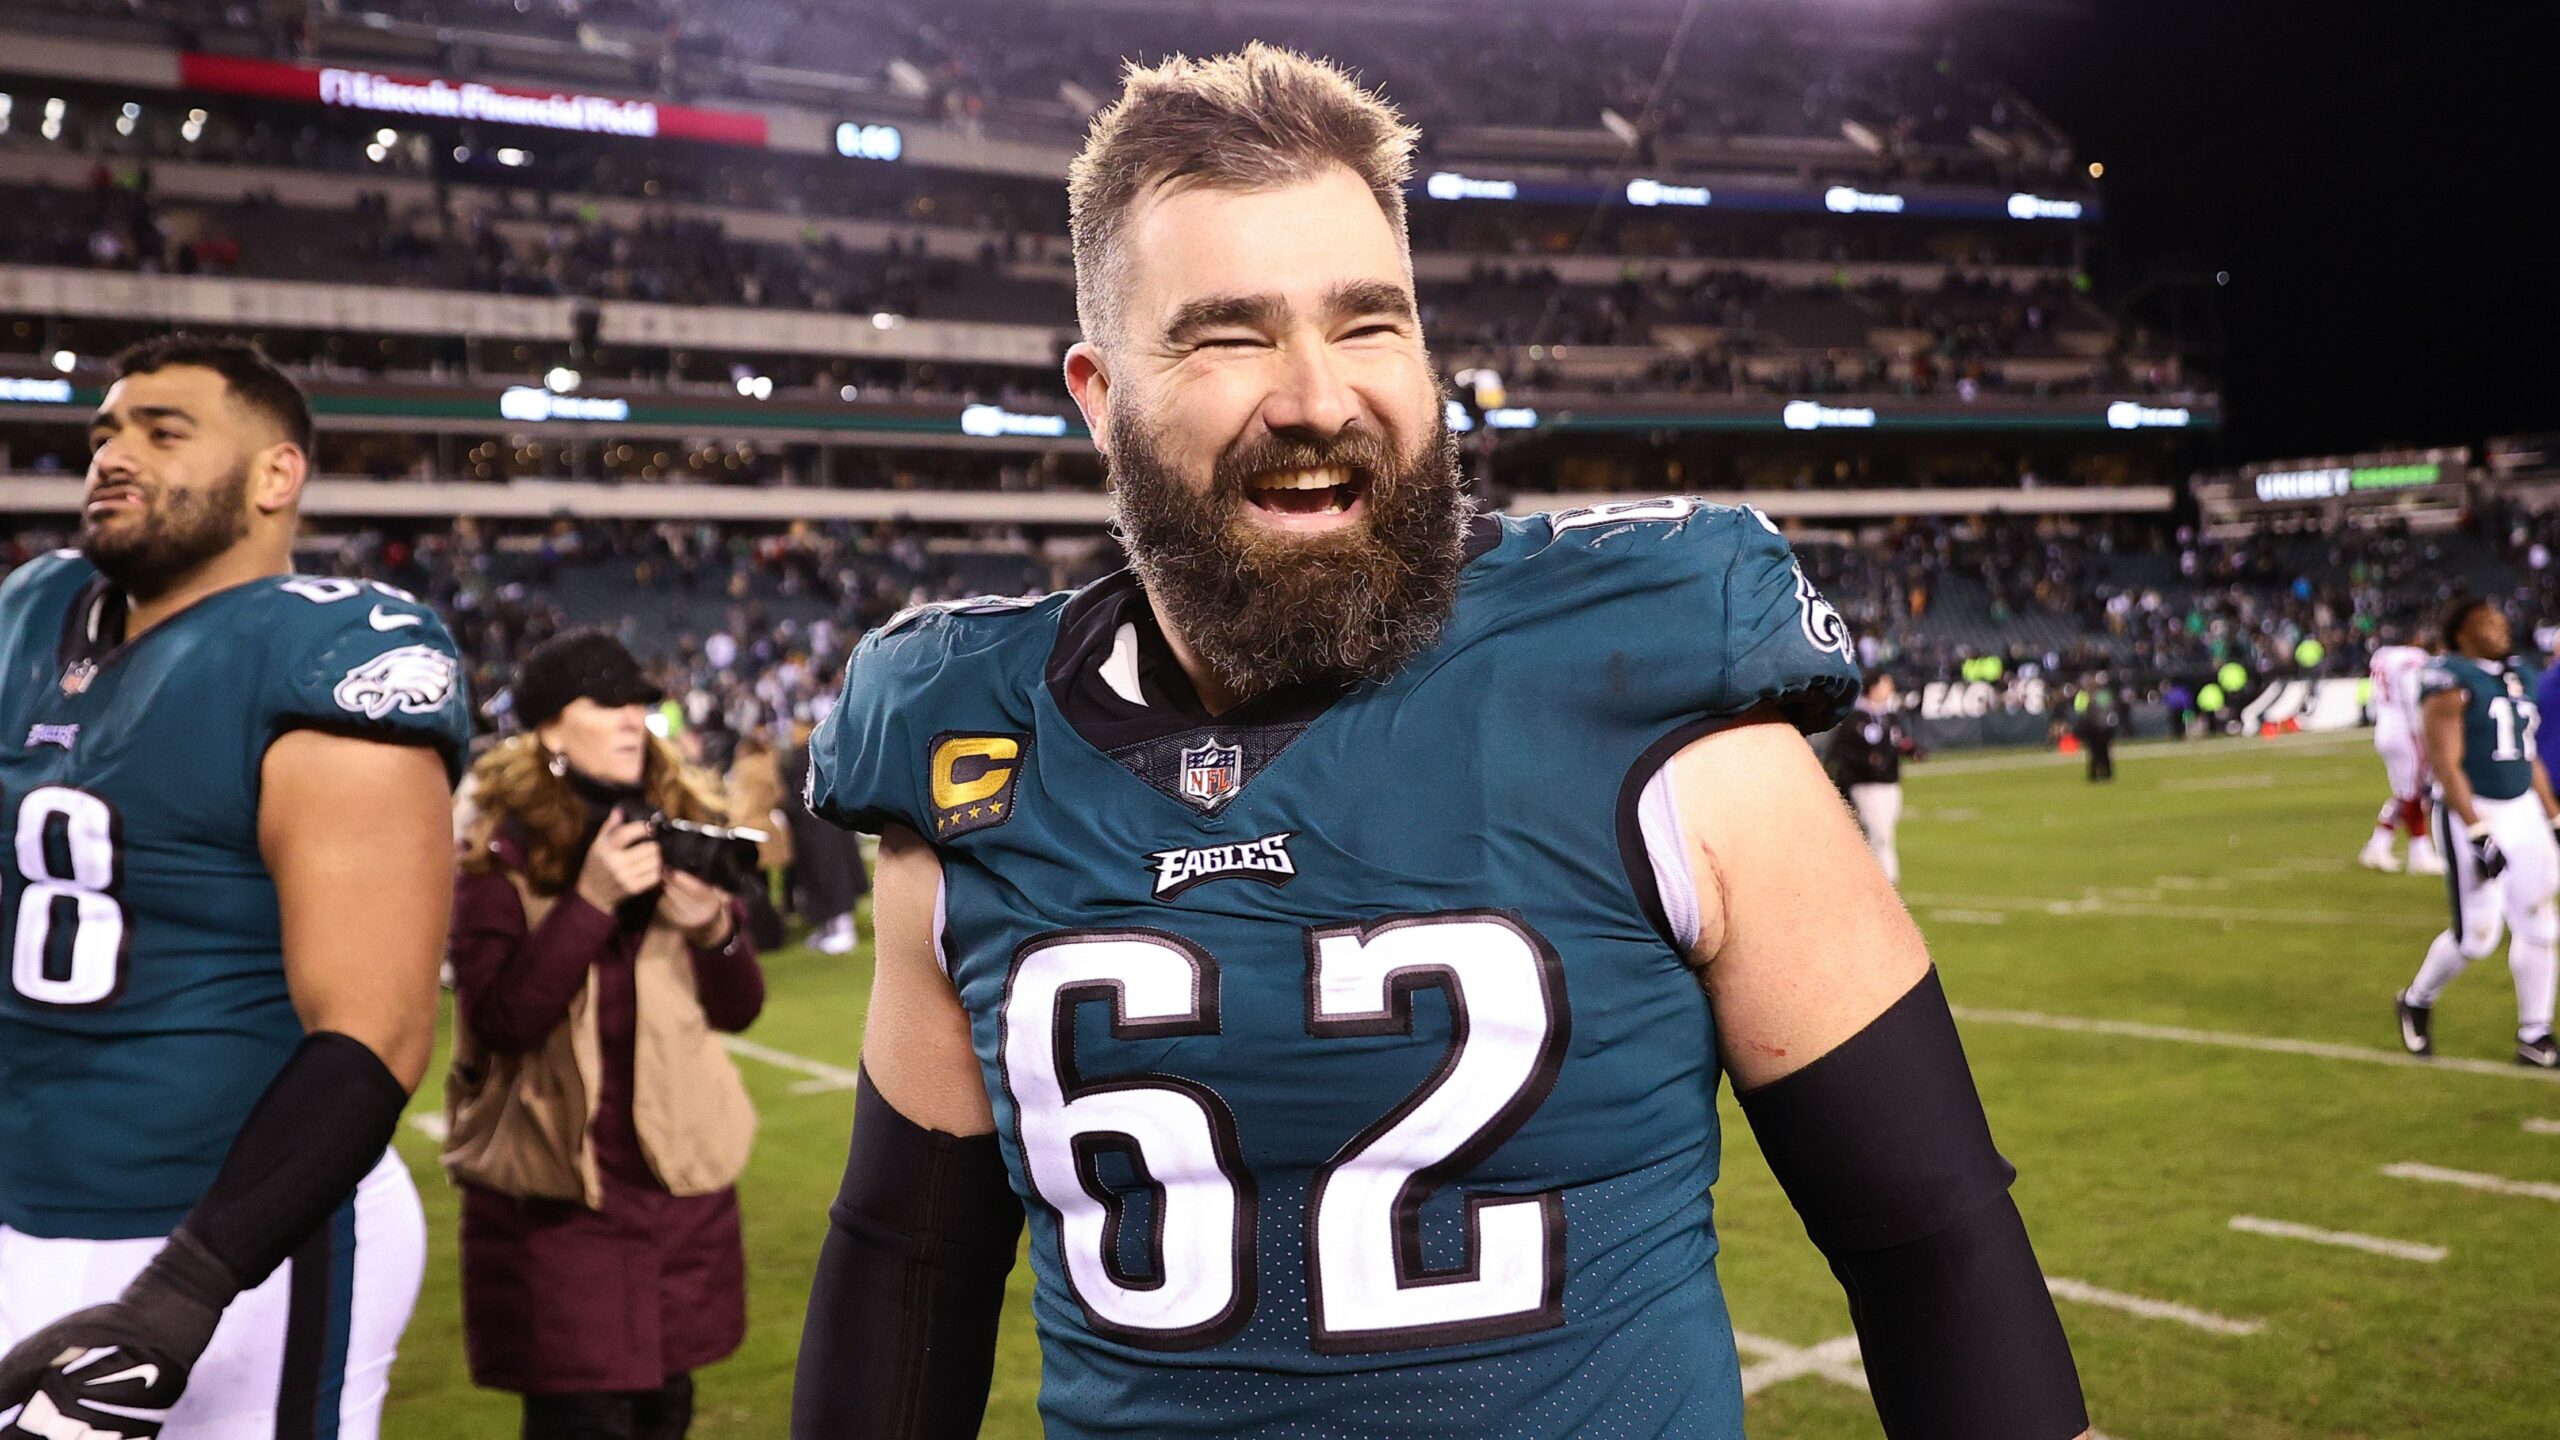 AT&T Stadium Declared “One of the Worst Places to Play” by Jason Kelce